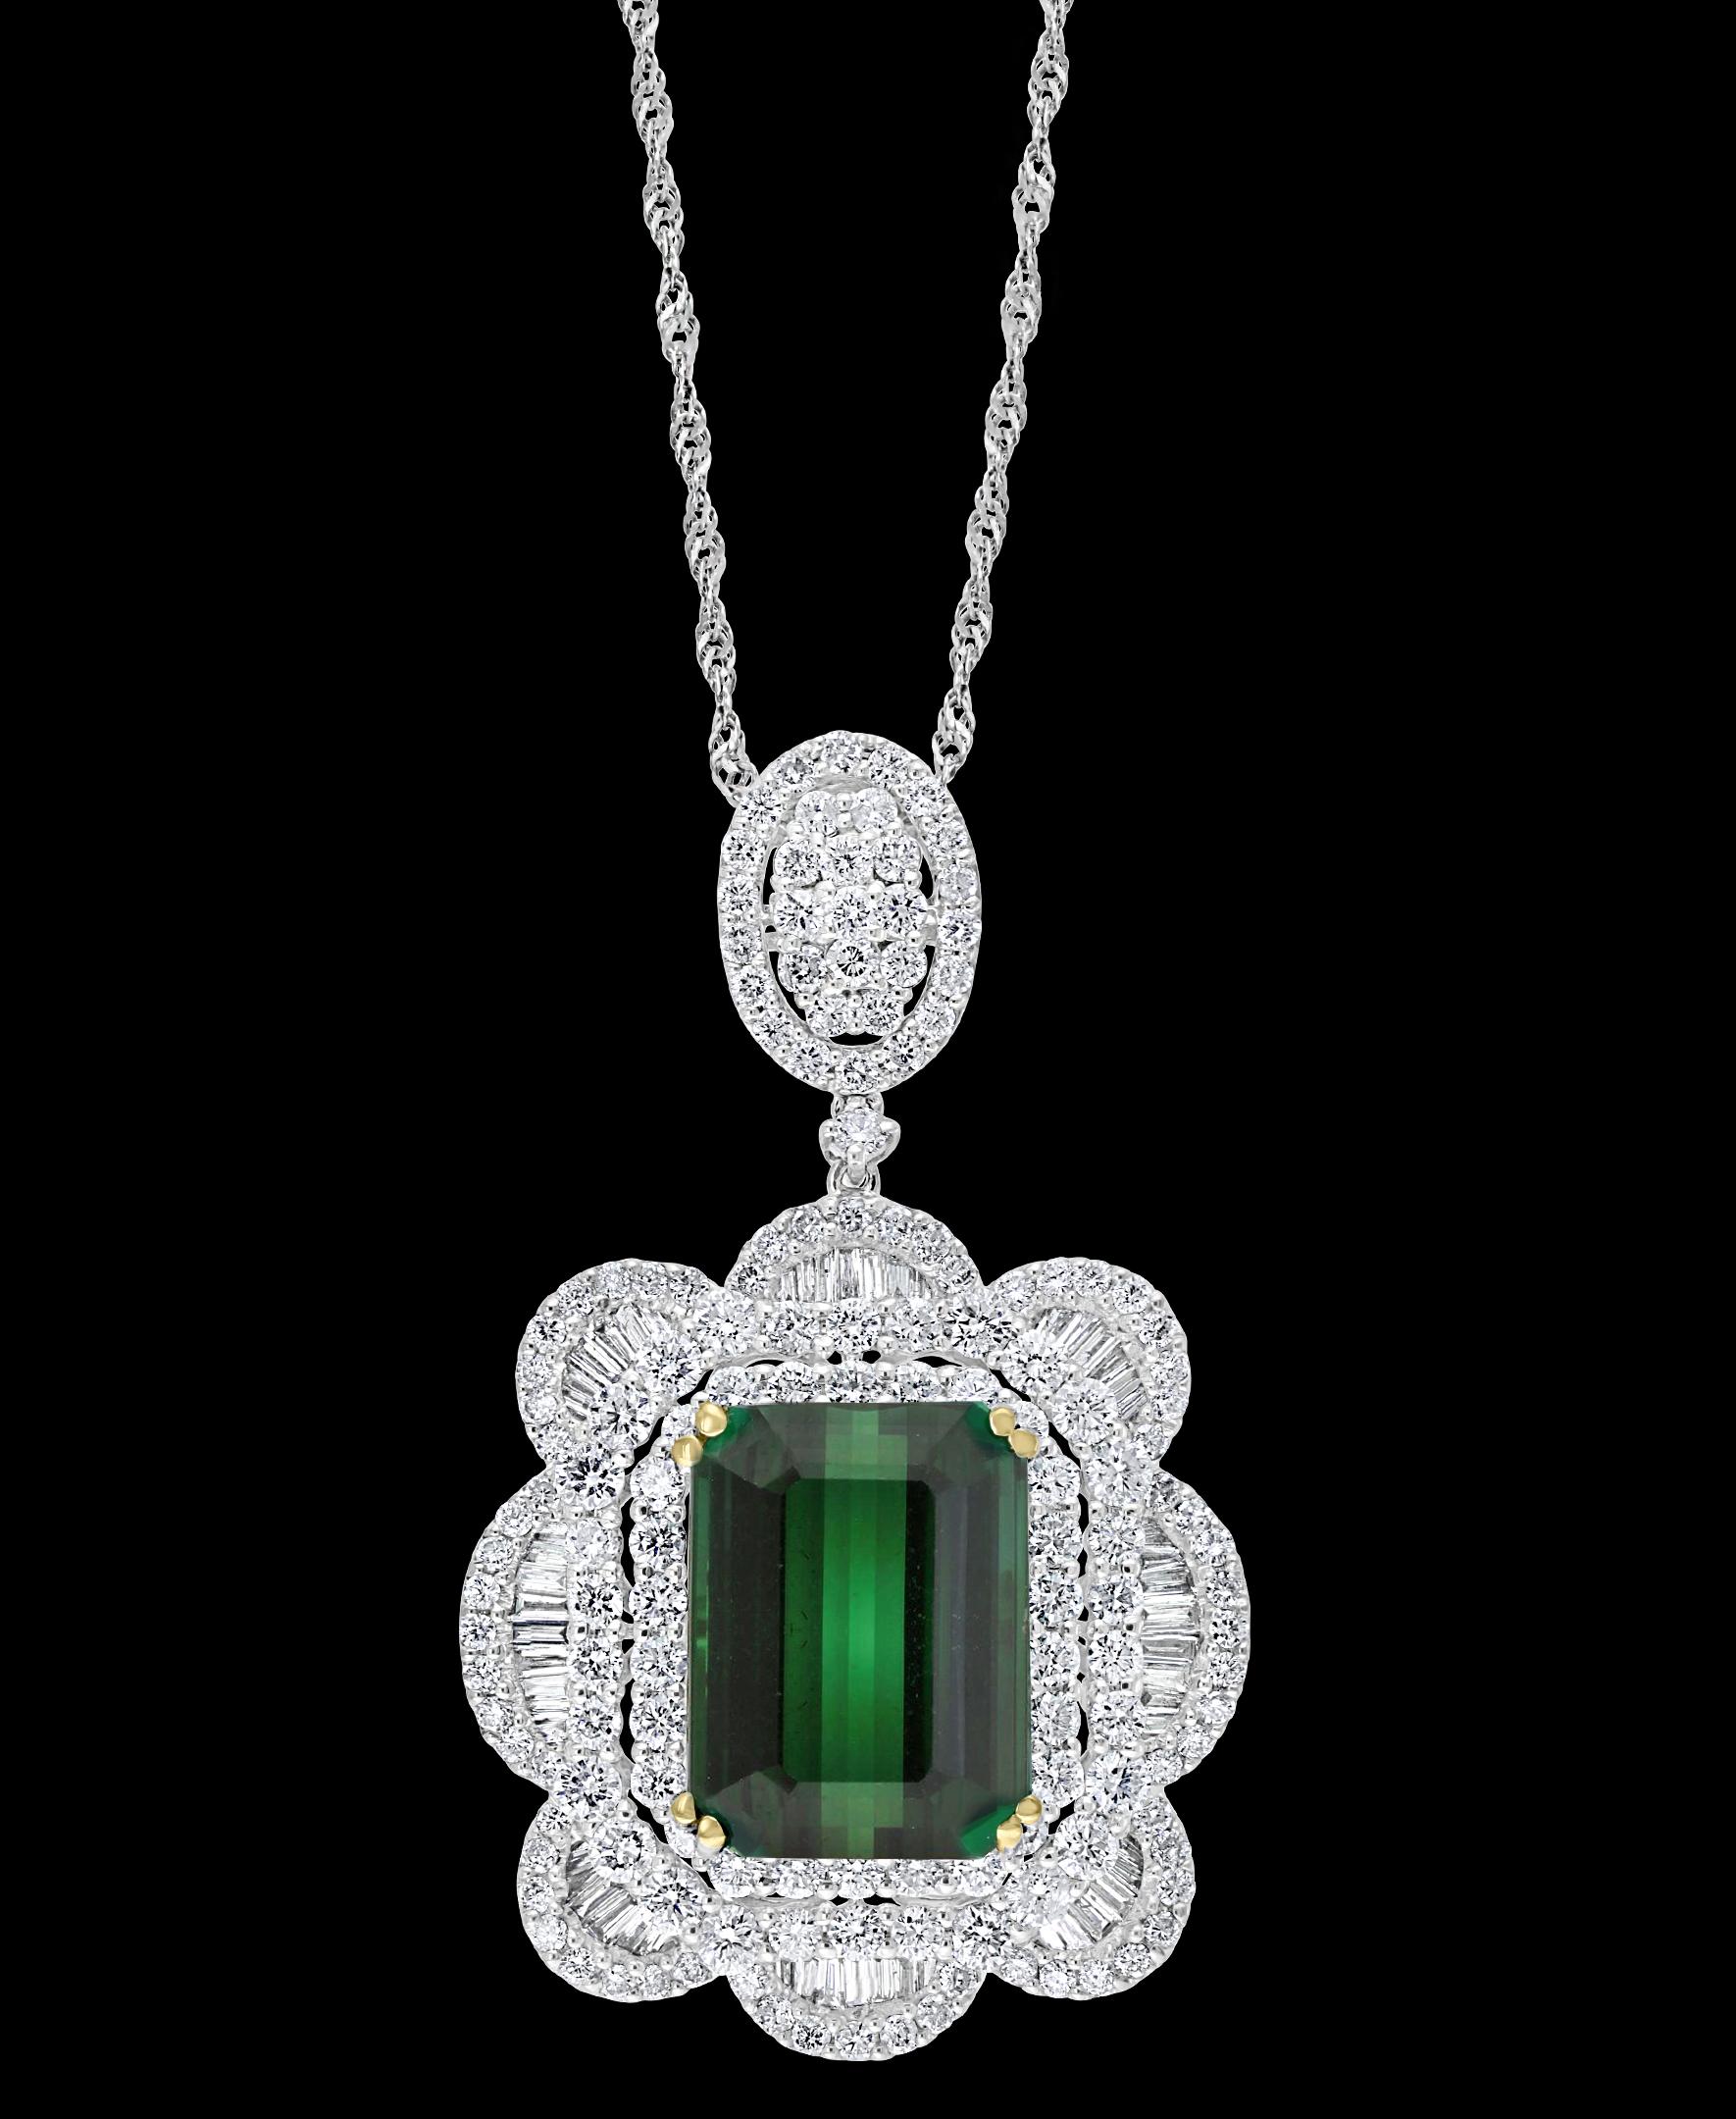   11.2 Carat Green Tourmaline & 4.5 Carat Diamond Pendant / Necklace 18 Karat Gold, Estate
This spectacular Pendant Necklace  consisting of a single Cushion  Shape Green Tourmaline  11.22 Carat.  The  Green Tourmaline  is surrounded by approximately